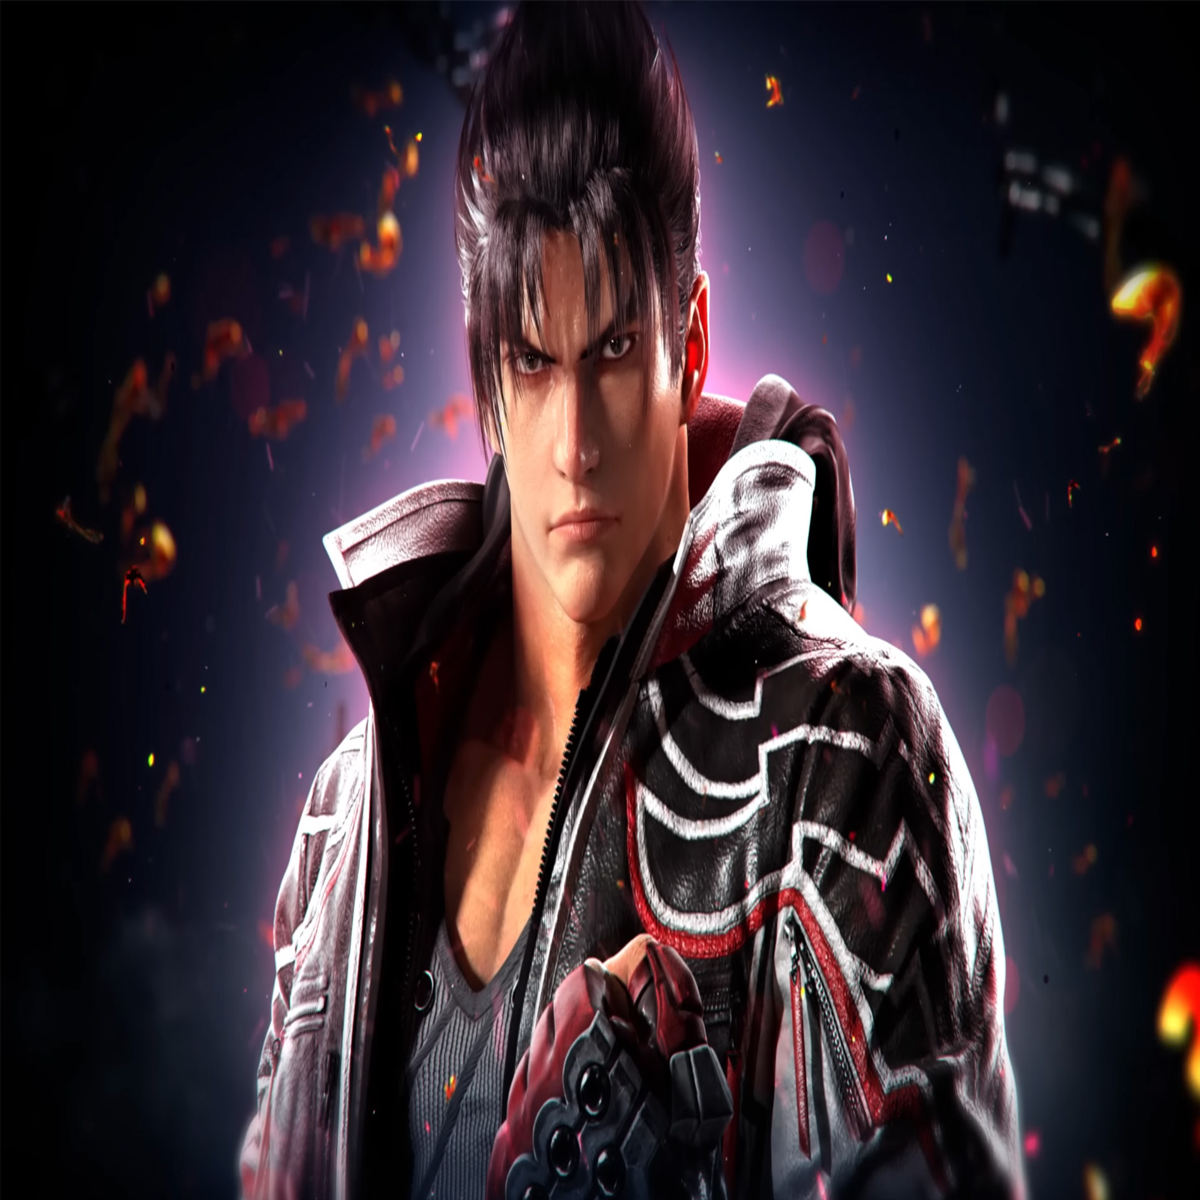 Tekken 8 CBT 2 Codes are out, check your emails